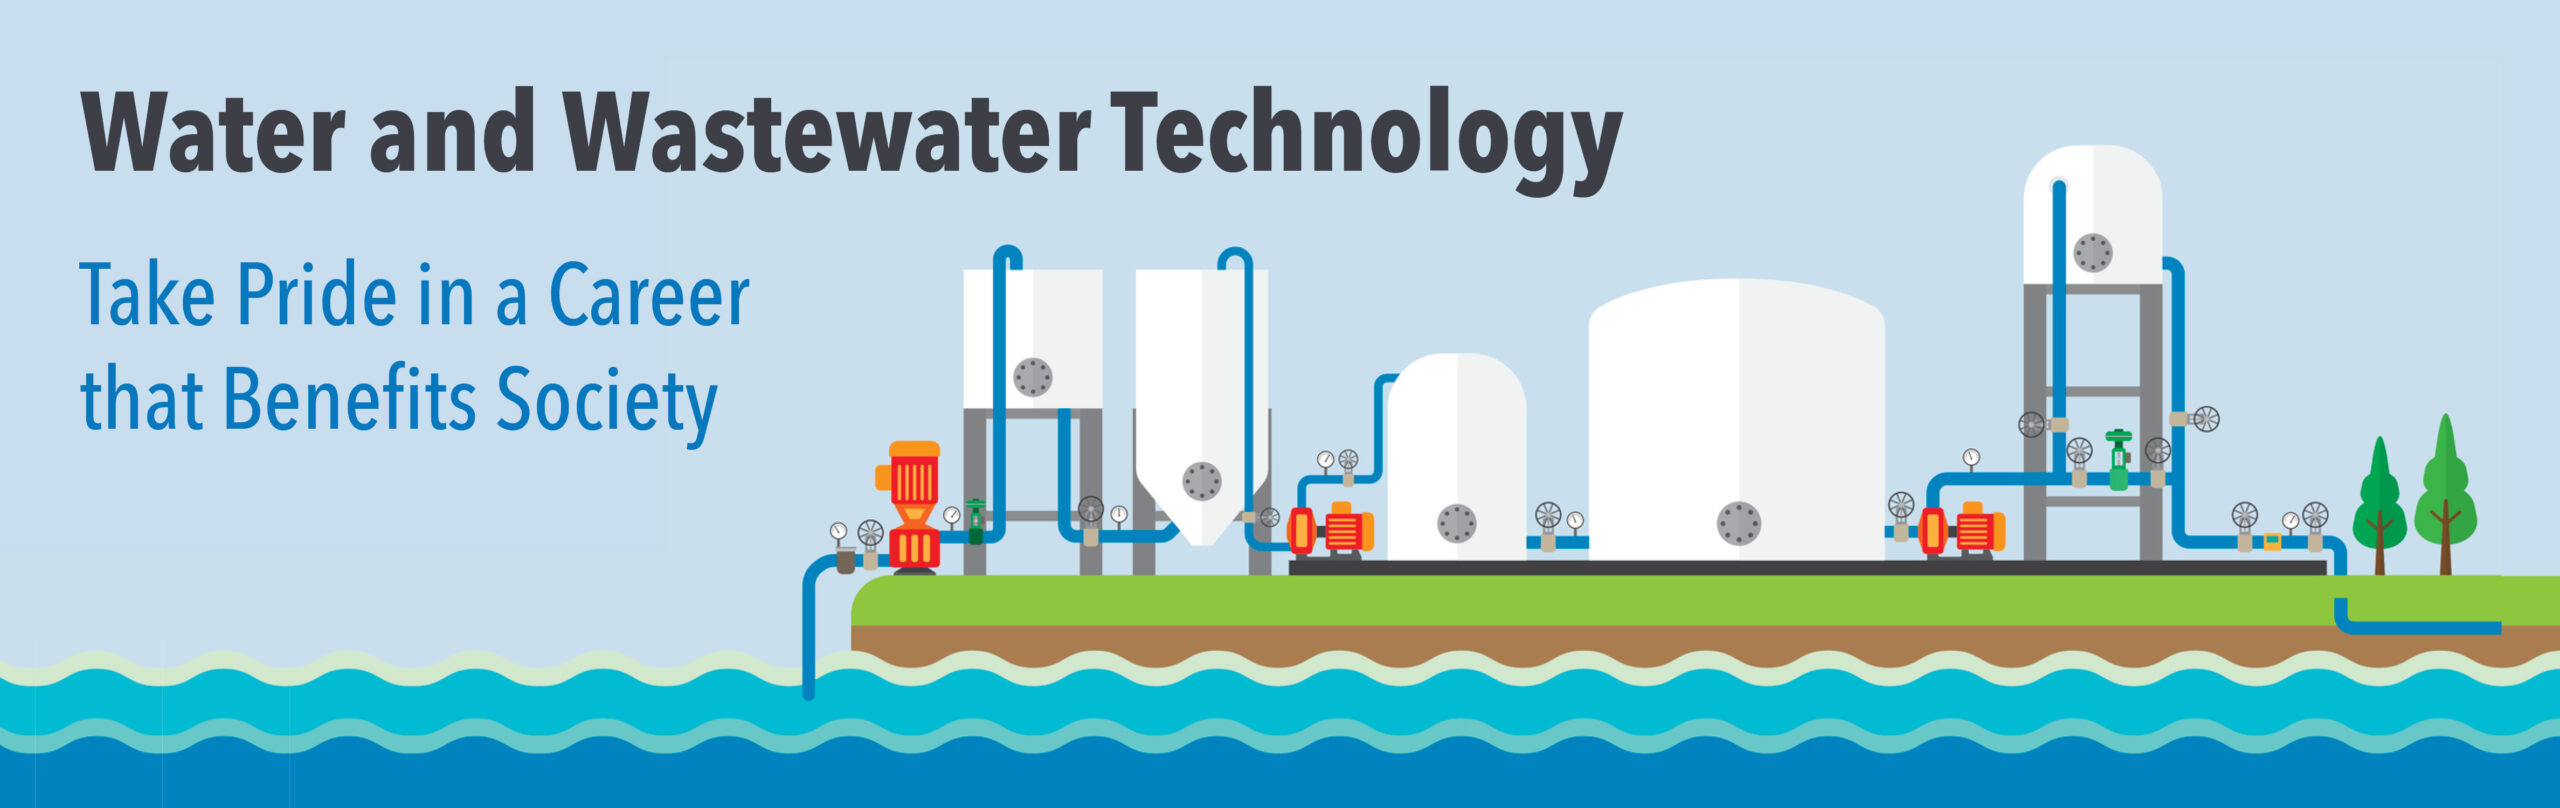 water waste technology training